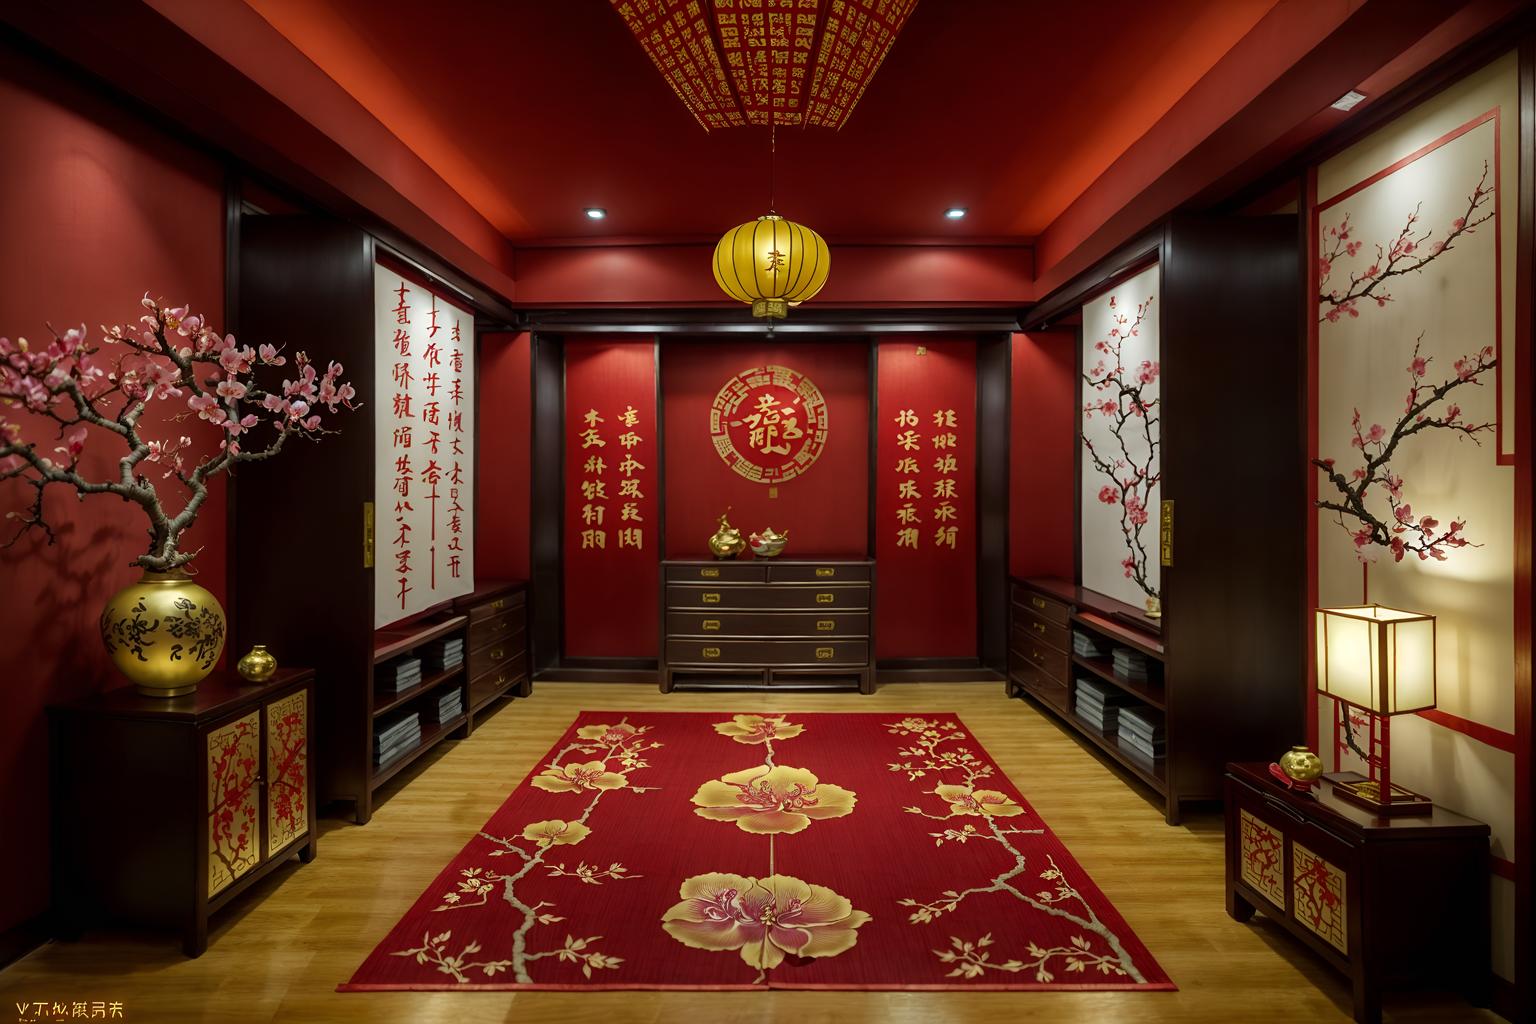 chinese new year-style (walk in closet interior) . with mei hwa flowers and zodiac calendar and fai chun banners and money tree and paper firecrackers and paper cuttings and vases of plum blossoms and orchids and red and gold candles. . cinematic photo, highly detailed, cinematic lighting, ultra-detailed, ultrarealistic, photorealism, 8k. chinese new year interior design style. masterpiece, cinematic light, ultrarealistic+, photorealistic+, 8k, raw photo, realistic, sharp focus on eyes, (symmetrical eyes), (intact eyes), hyperrealistic, highest quality, best quality, , highly detailed, masterpiece, best quality, extremely detailed 8k wallpaper, masterpiece, best quality, ultra-detailed, best shadow, detailed background, detailed face, detailed eyes, high contrast, best illumination, detailed face, dulux, caustic, dynamic angle, detailed glow. dramatic lighting. highly detailed, insanely detailed hair, symmetrical, intricate details, professionally retouched, 8k high definition. strong bokeh. award winning photo.